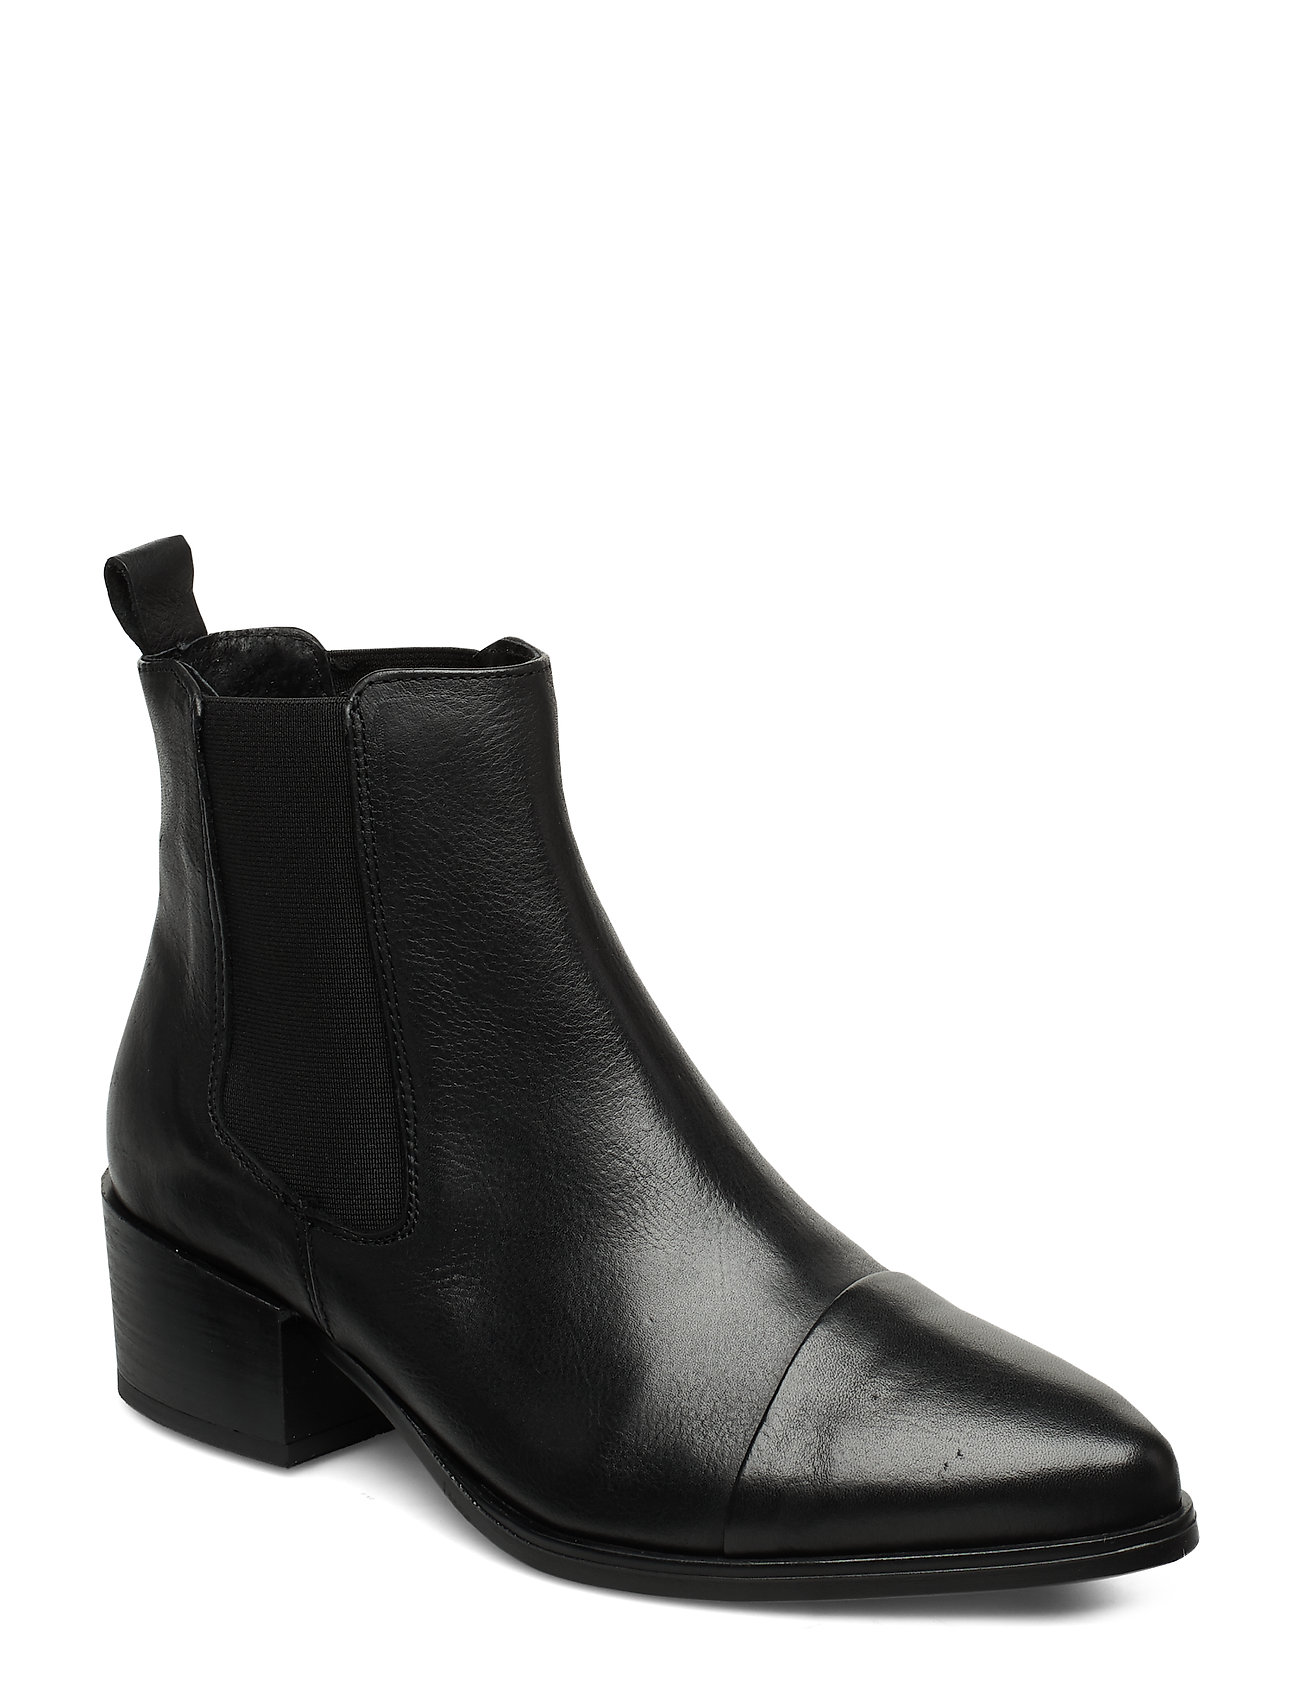 Parker Shoes Boots Ankle Boots Ankle Boot - Heel Musta Pavement